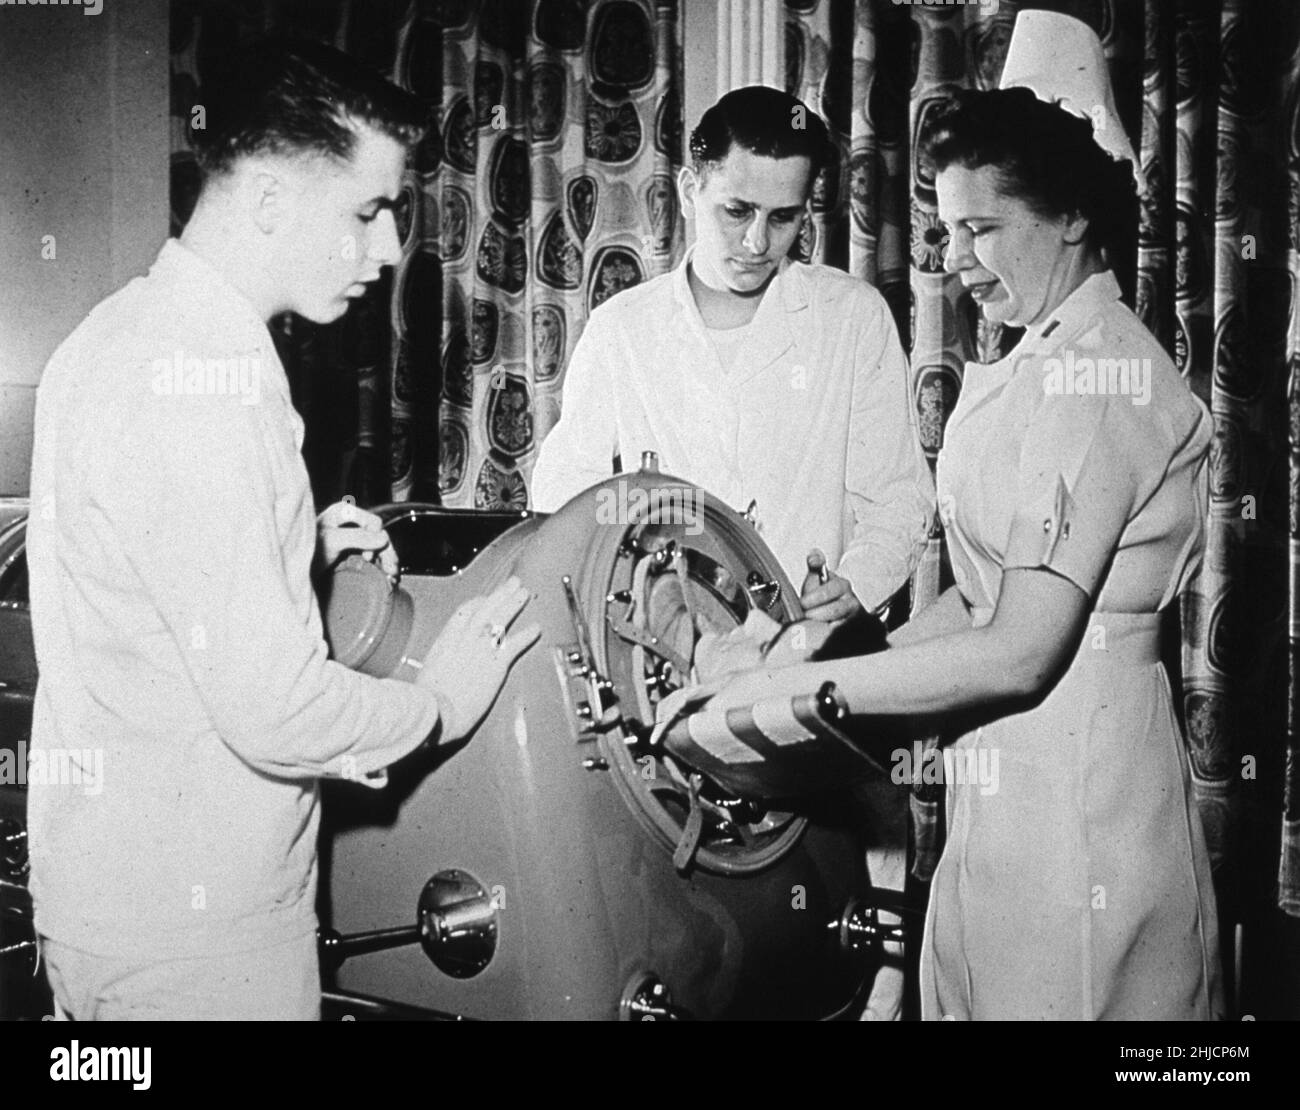 A nurse and two corpsmen attend to a poliomyelitis patient in an iron lung. United States Army, 1949. Stock Photo